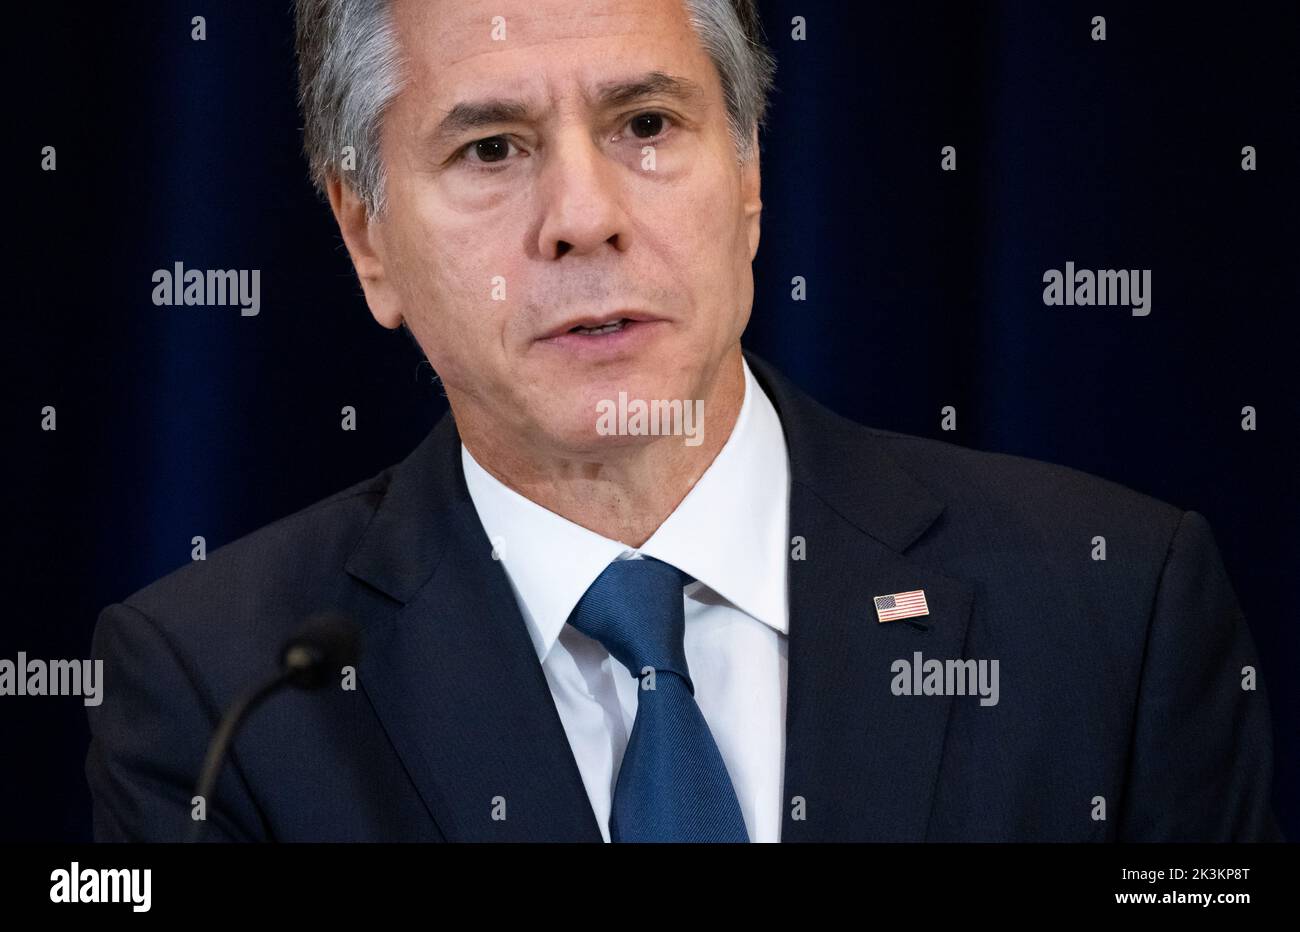 U.S. Secretary of State Antony Blinken attends a press conference with India's Foreign Minister Subrahmanyam Jaishankar at the State Department in Washington, U.S., September 27, 2022. Saul Loeb/Pool via REUTERS Stock Photo